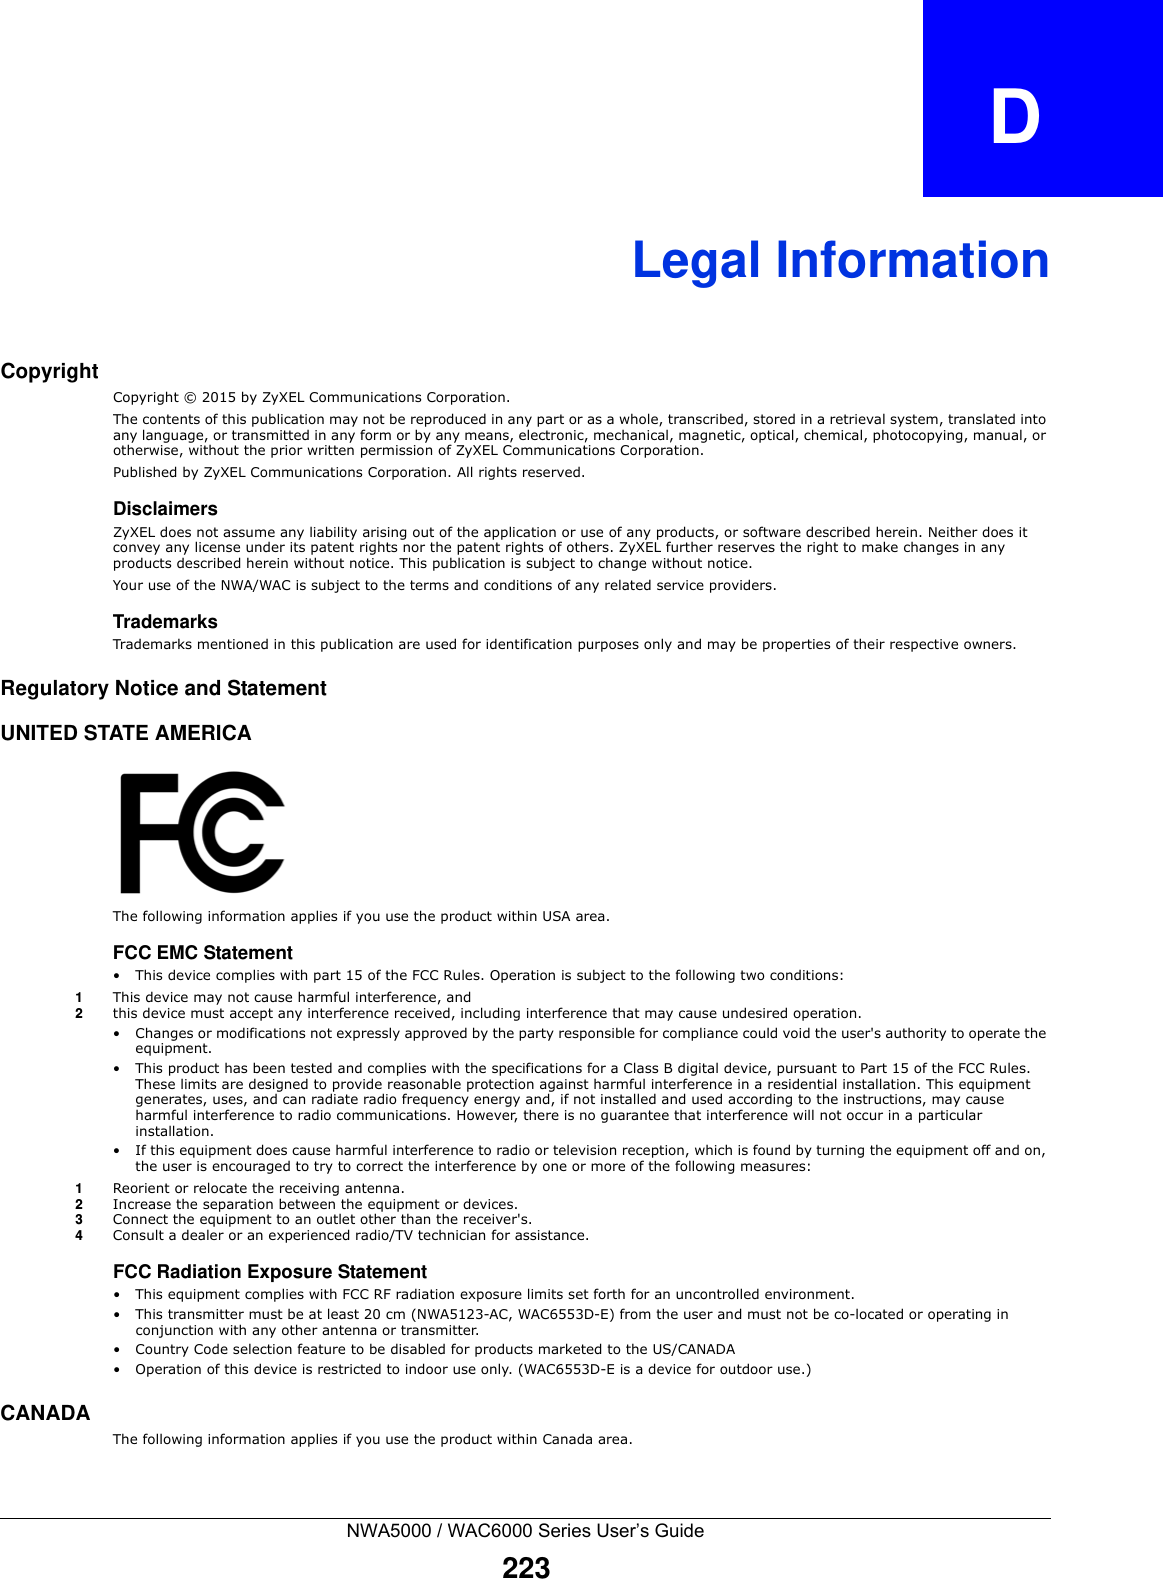 NWA5000 / WAC6000 Series User’s Guide223APPENDIX   DLegal InformationCopyrightCopyright © 2015 by ZyXEL Communications Corporation.The contents of this publication may not be reproduced in any part or as a whole, transcribed, stored in a retrieval system, translated into any language, or transmitted in any form or by any means, electronic, mechanical, magnetic, optical, chemical, photocopying, manual, or otherwise, without the prior written permission of ZyXEL Communications Corporation.Published by ZyXEL Communications Corporation. All rights reserved.DisclaimersZyXEL does not assume any liability arising out of the application or use of any products, or software described herein. Neither does it convey any license under its patent rights nor the patent rights of others. ZyXEL further reserves the right to make changes in any products described herein without notice. This publication is subject to change without notice.Your use of the NWA/WAC is subject to the terms and conditions of any related service providers. TrademarksTrademarks mentioned in this publication are used for identification purposes only and may be properties of their respective owners.Regulatory Notice and StatementUNITED STATE AMERICAThe following information applies if you use the product within USA area.FCC EMC Statement • This device complies with part 15 of the FCC Rules. Operation is subject to the following two conditions:1This device may not cause harmful interference, and 2this device must accept any interference received, including interference that may cause undesired operation.• Changes or modifications not expressly approved by the party responsible for compliance could void the user&apos;s authority to operate the equipment.• This product has been tested and complies with the specifications for a Class B digital device, pursuant to Part 15 of the FCC Rules. These limits are designed to provide reasonable protection against harmful interference in a residential installation. This equipment generates, uses, and can radiate radio frequency energy and, if not installed and used according to the instructions, may cause harmful interference to radio communications. However, there is no guarantee that interference will not occur in a particular installation. • If this equipment does cause harmful interference to radio or television reception, which is found by turning the equipment off and on, the user is encouraged to try to correct the interference by one or more of the following measures:1Reorient or relocate the receiving antenna.2Increase the separation between the equipment or devices.3Connect the equipment to an outlet other than the receiver&apos;s.4Consult a dealer or an experienced radio/TV technician for assistance.FCC Radiation Exposure Statement• This equipment complies with FCC RF radiation exposure limits set forth for an uncontrolled environment. • This transmitter must be at least 20 cm (NWA5123-AC, WAC6553D-E) from the user and must not be co-located or operating in conjunction with any other antenna or transmitter.• Country Code selection feature to be disabled for products marketed to the US/CANADA• Operation of this device is restricted to indoor use only. (WAC6553D-E is a device for outdoor use.)CANADAThe following information applies if you use the product within Canada area.